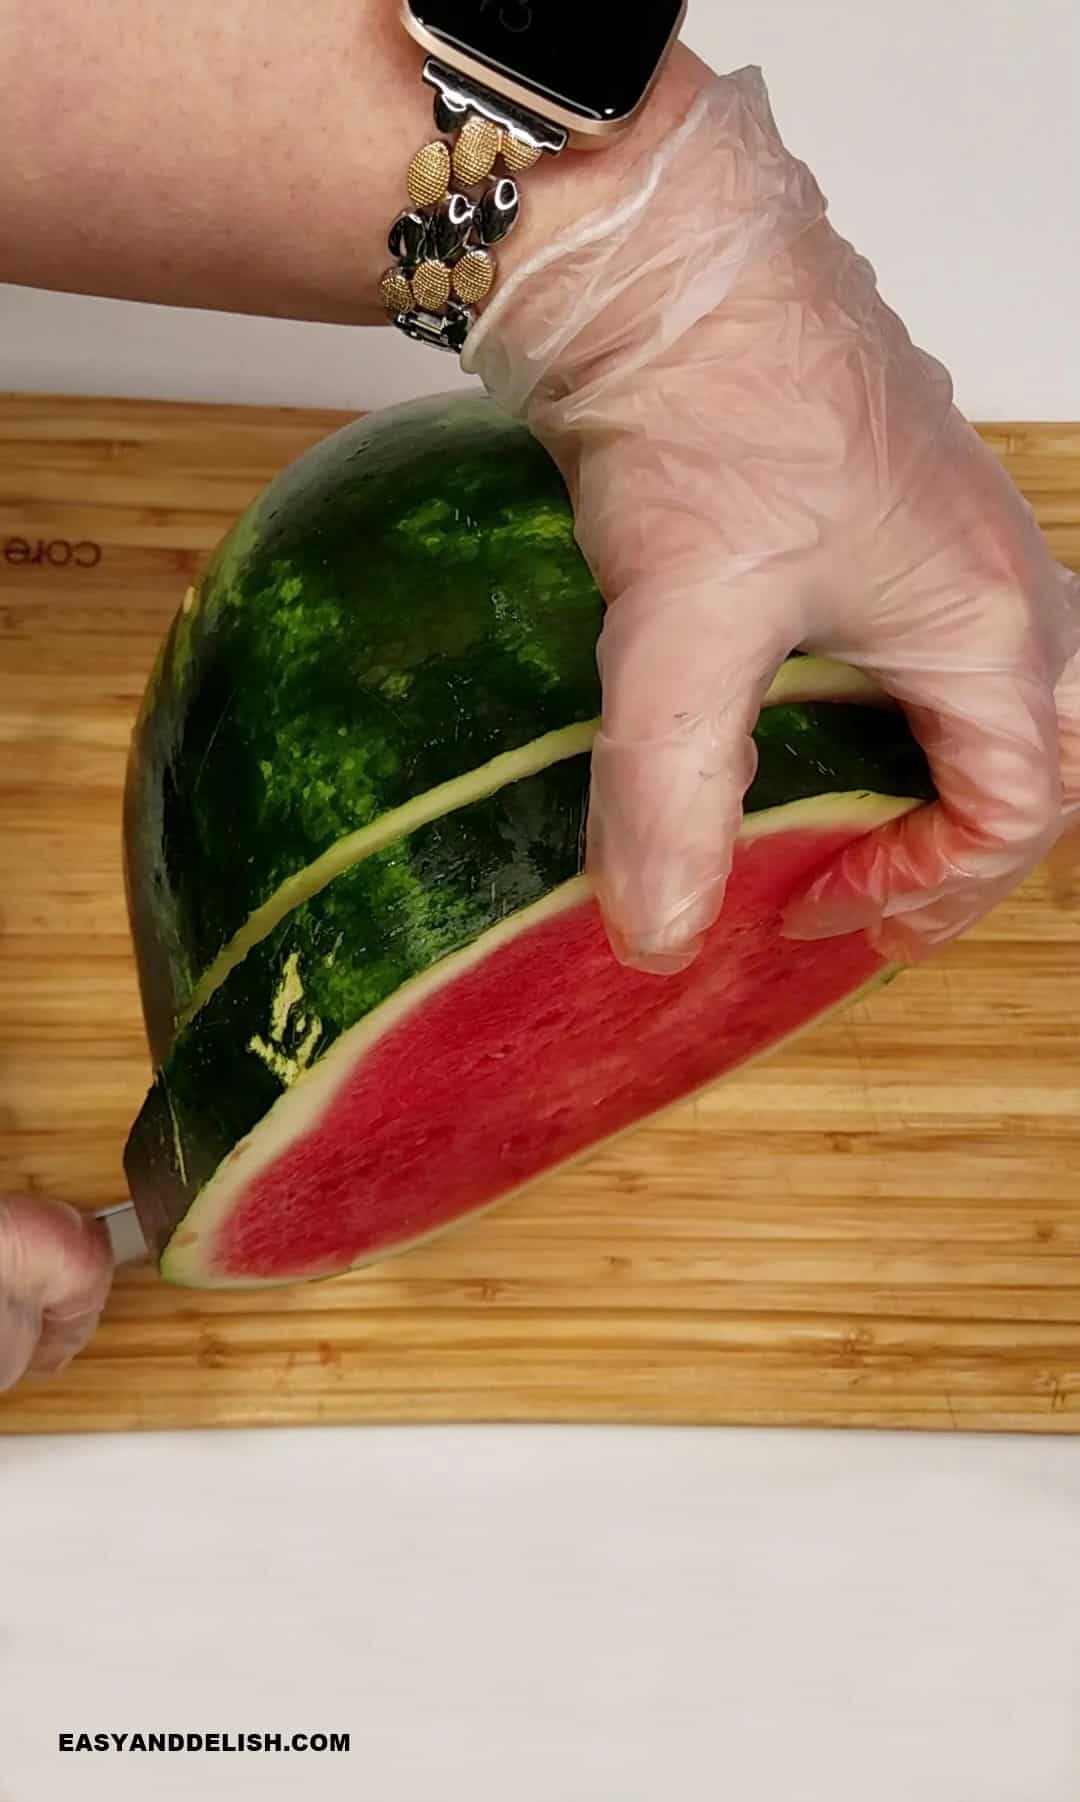 slicing a watermelon into rounds.